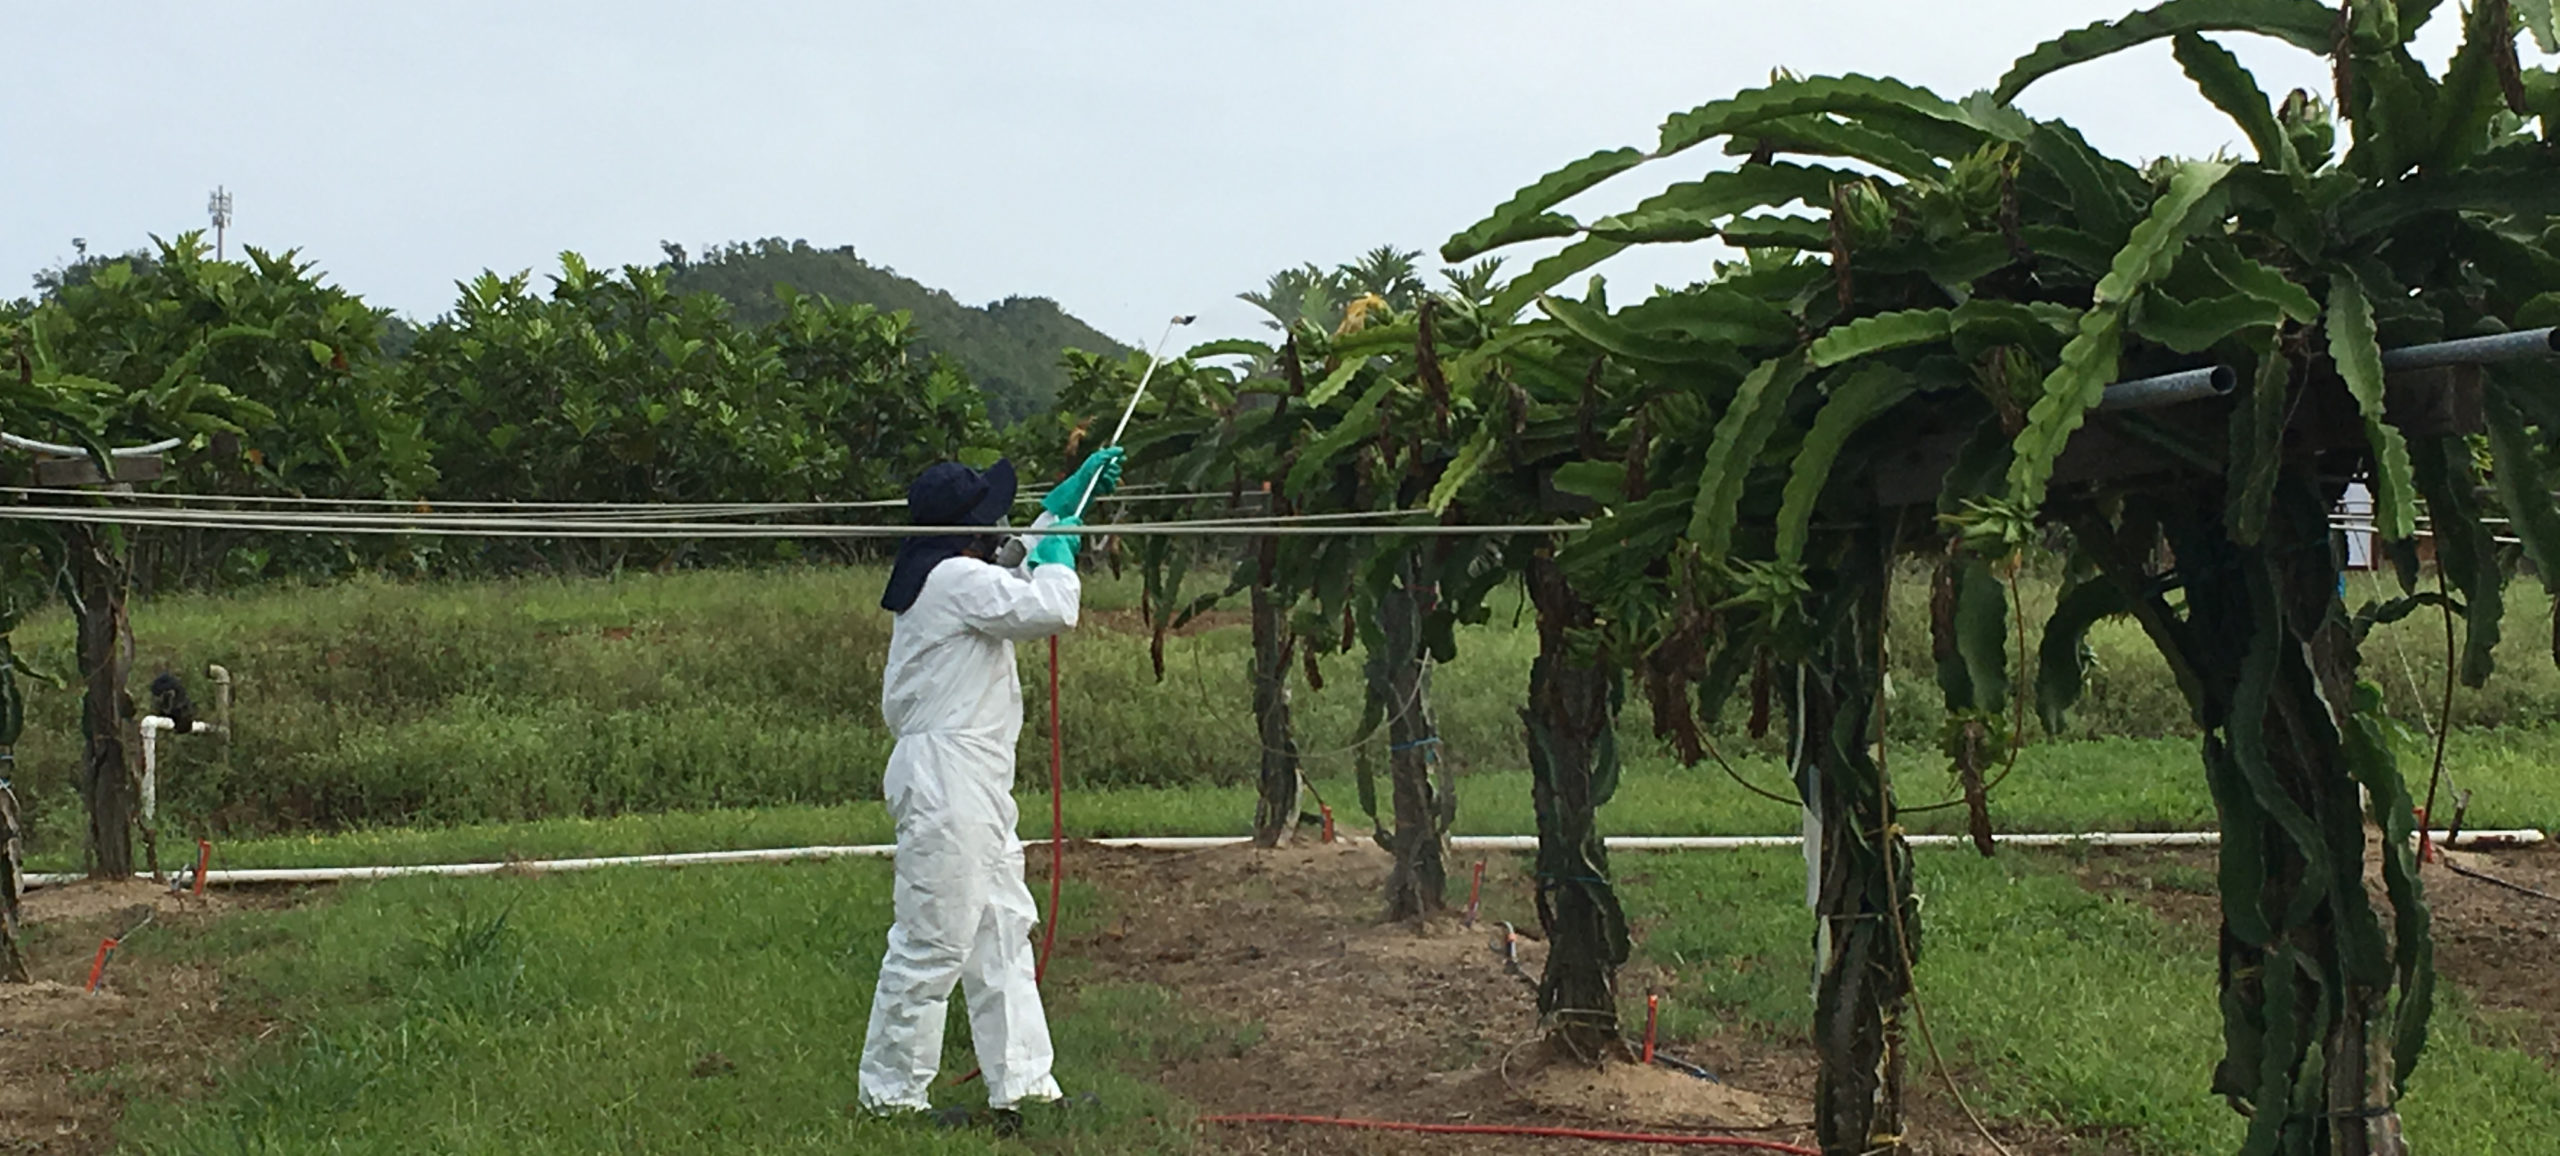 Person wearing protective clothing standing on a farm spraying a dragonfruit plant